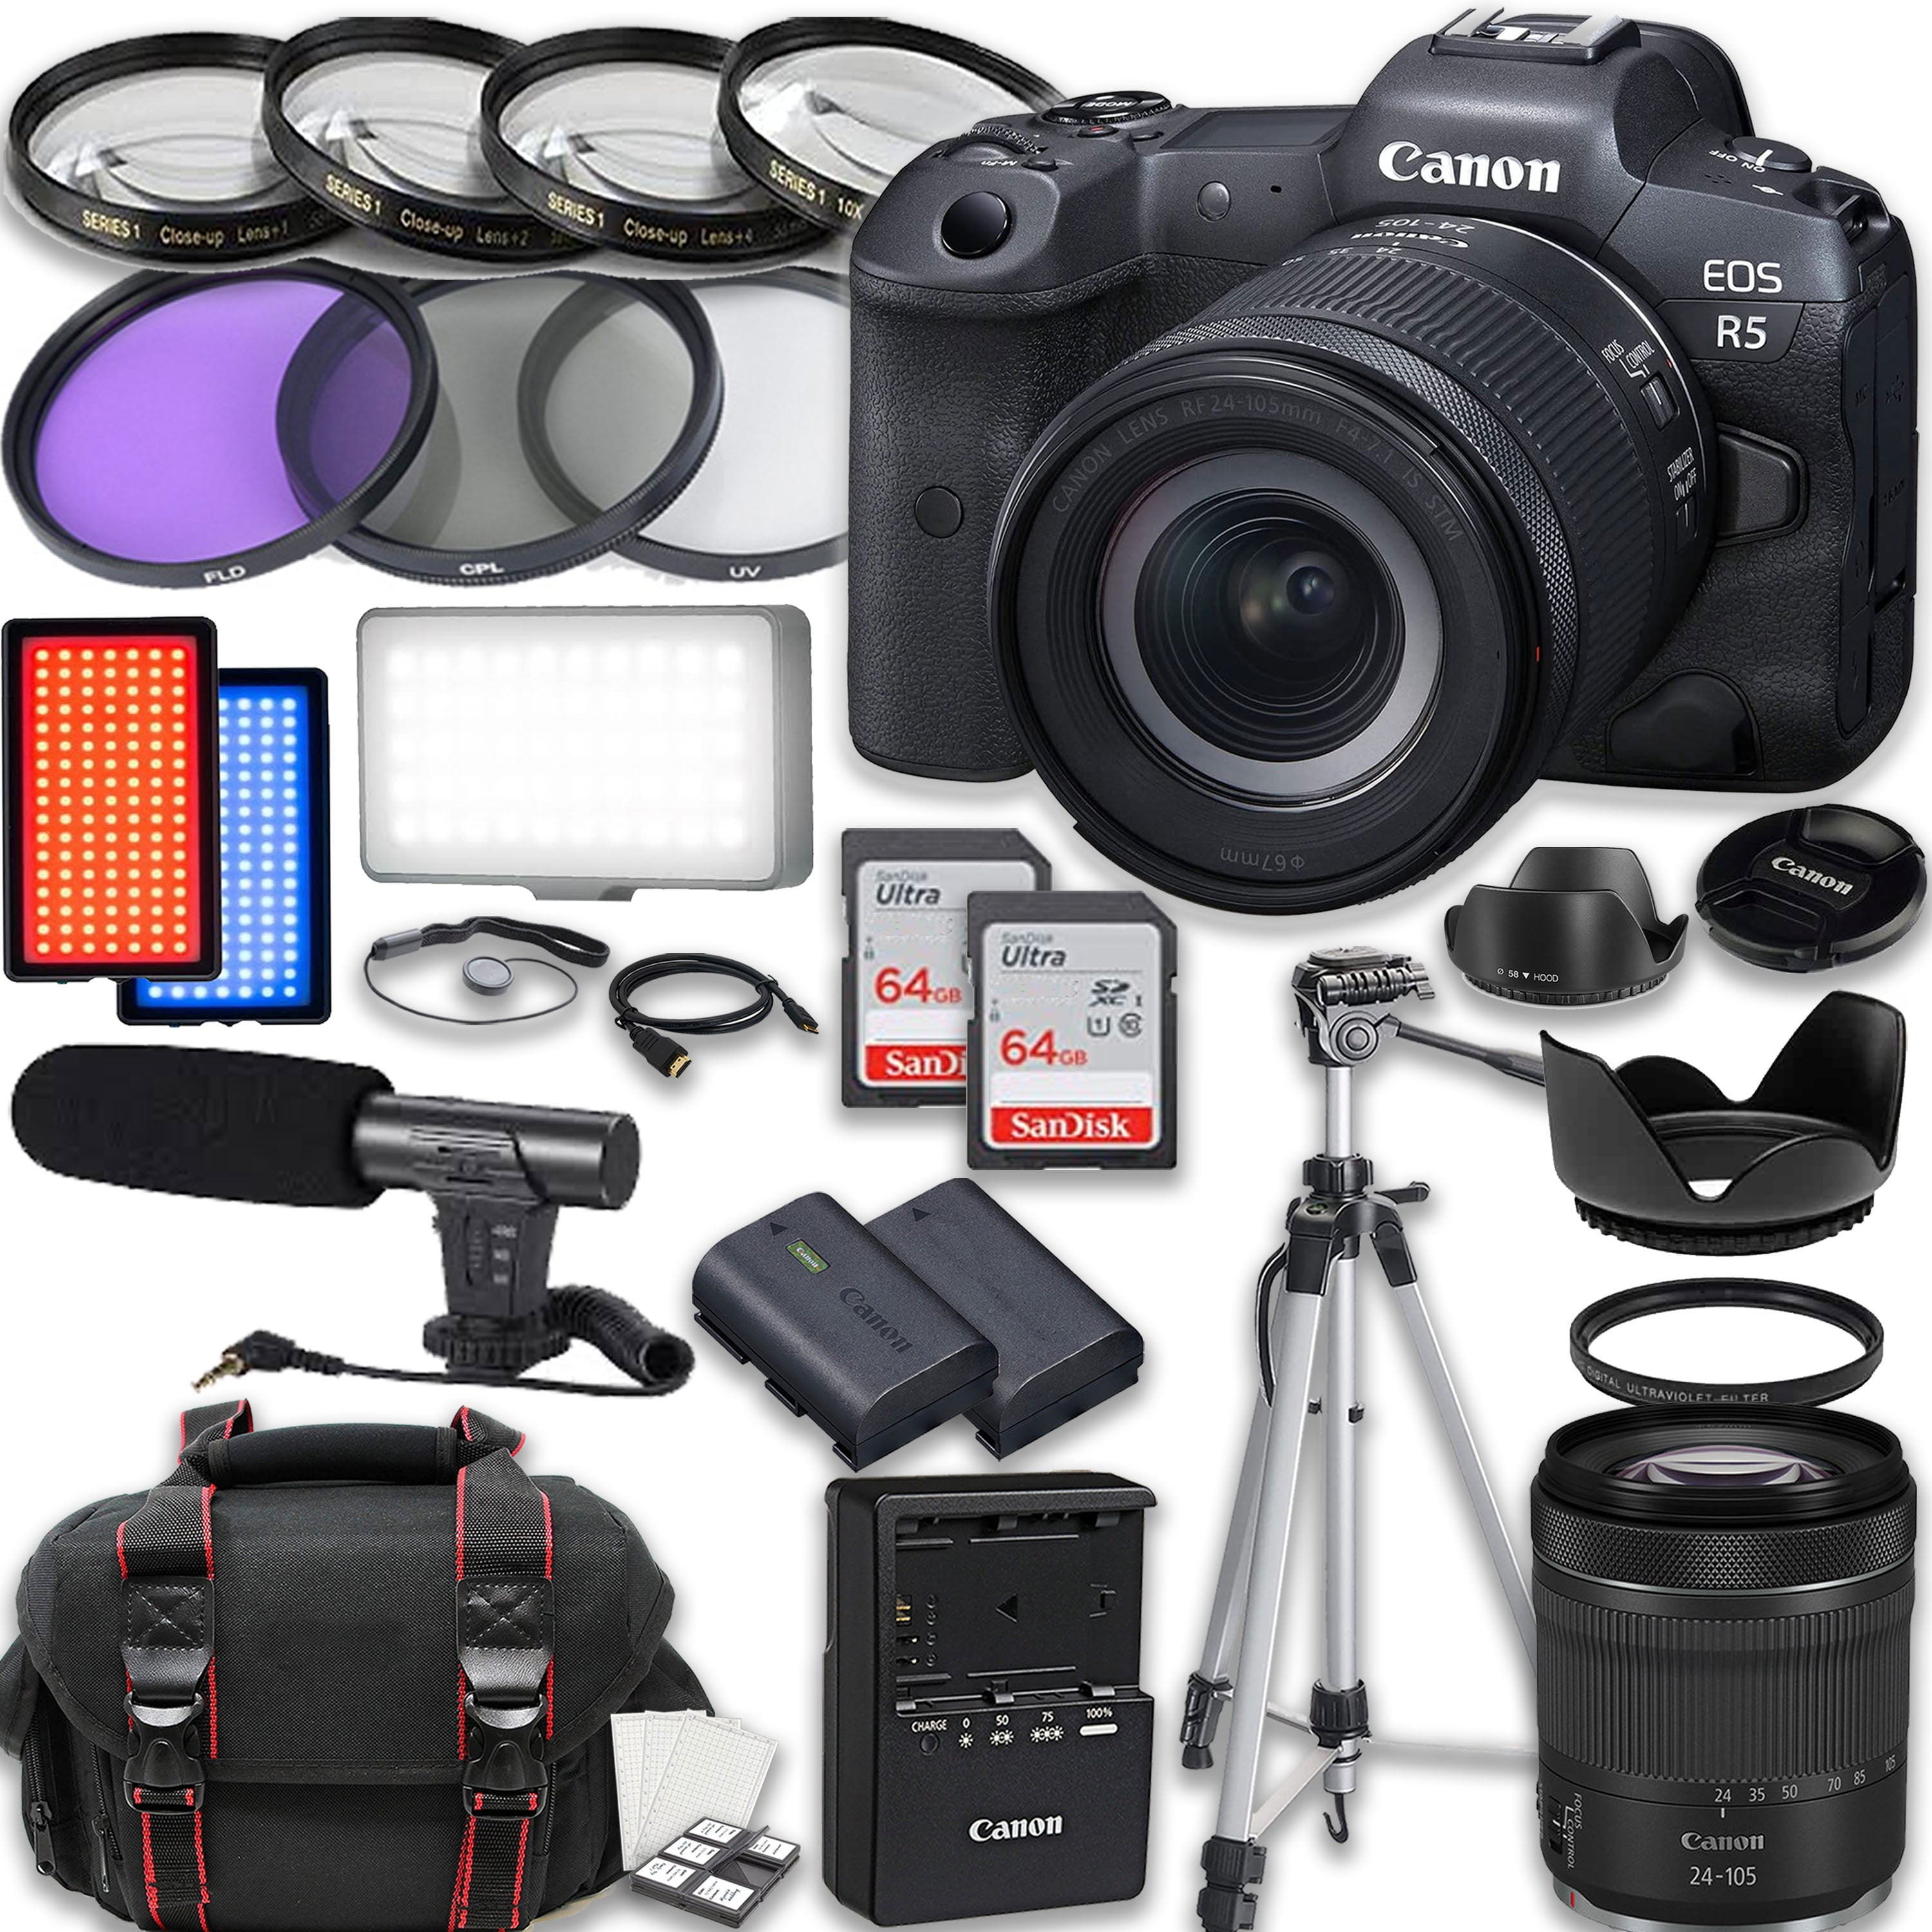 bruge Dyrke motion campingvogn Canon EOS R5 Full Frame Mirrorless Camera with RF 24-105mm STM Lens,  Accessories including: 2X 64GB Memory Cards, LED Video Light, Microphone,  Extra Battery, Case & More - Walmart.com